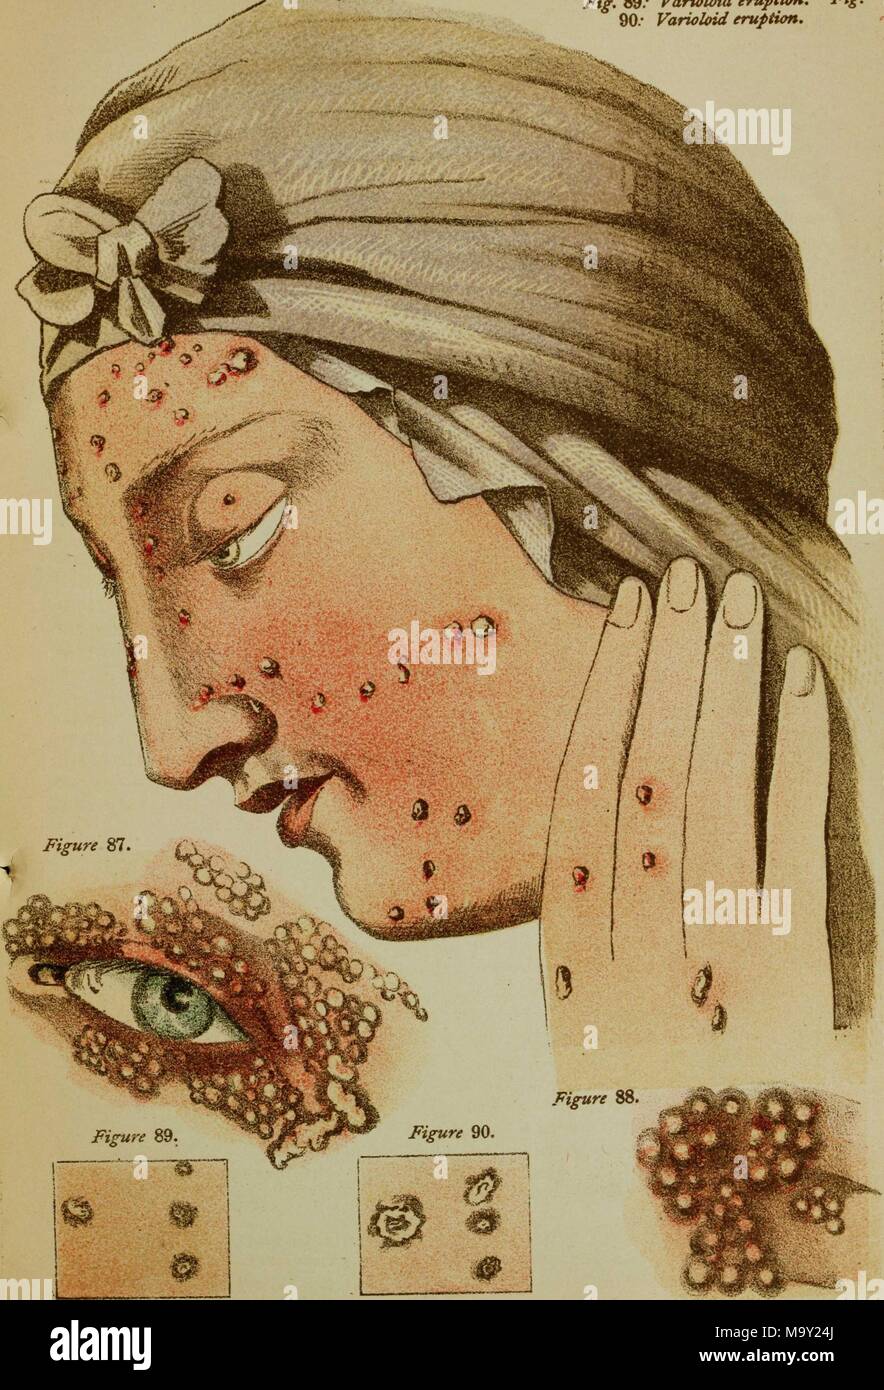 Color illustration depicting smallpox pustules, shown on the face and hand of a woman, in profile, wearing a scarf, with inset close-ups to illustrate pustule stages, and their presence on the eyelid, from the volume 'Contagious and Infectious Disease: measures for their prevention and arrest, small pox (variola), modified small pox (varioloid), chicken pox (varicella), cow pox (variole vaccinae), vaccination, spurious vaccination, ' authored by Joseph Jones, Edward Jenner, George Pearson, and William Woodville, 1884. () Stock Photo